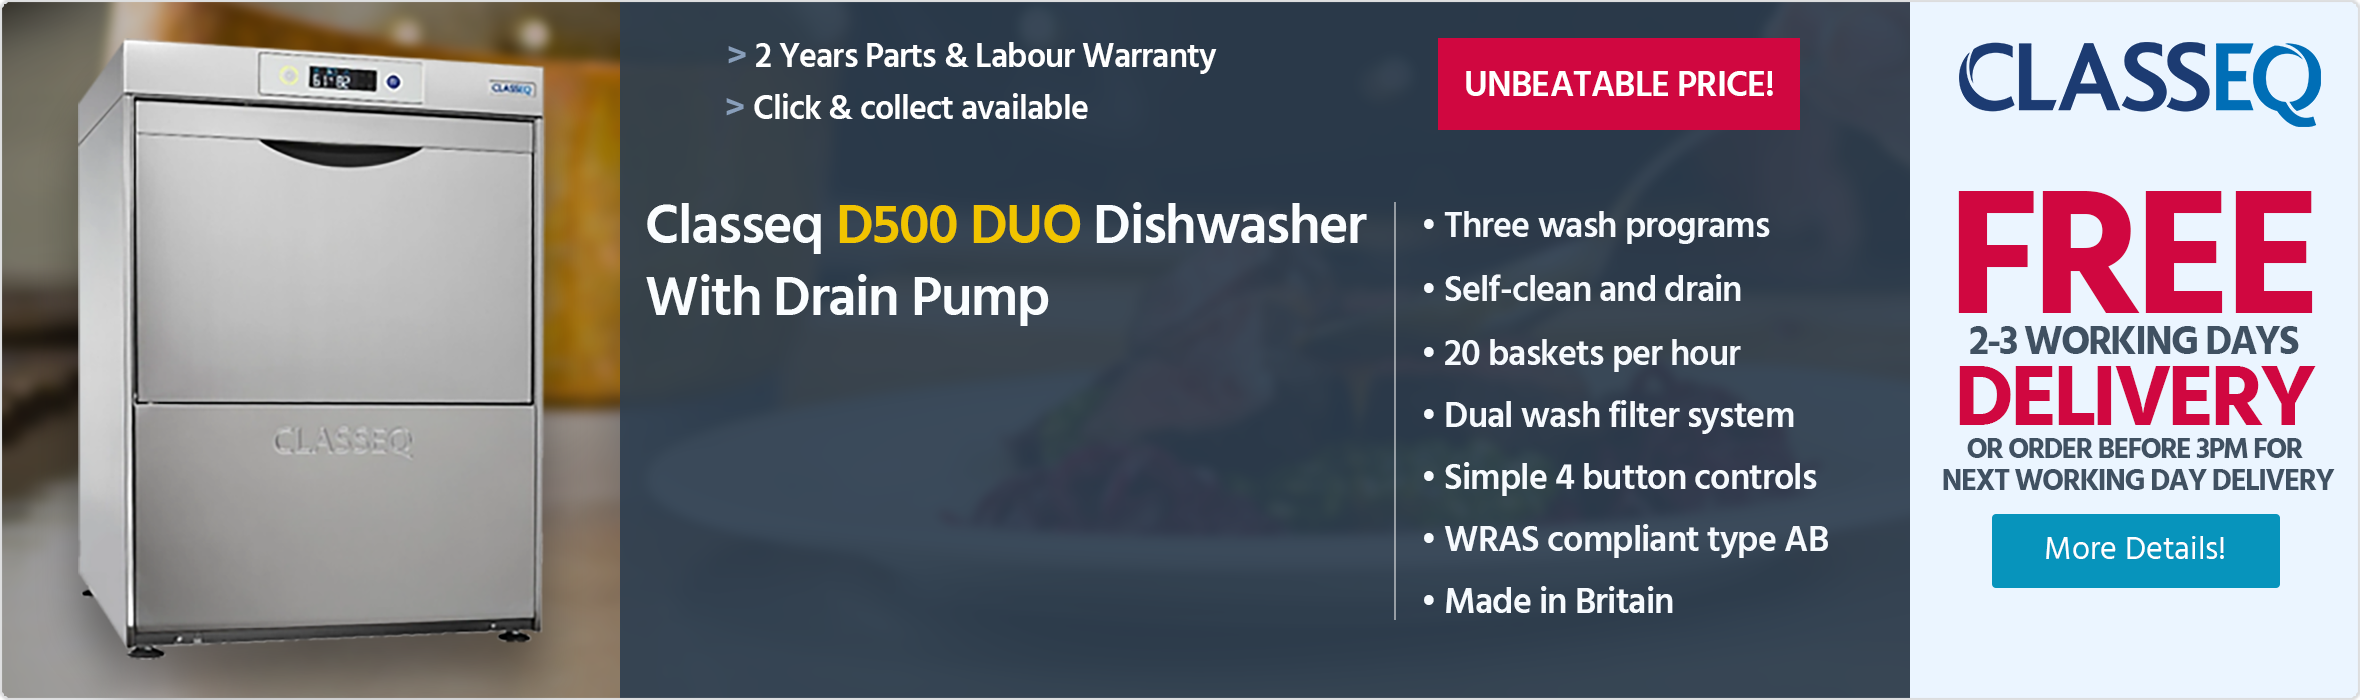 Classeq D500 DUO (DUO750) 500mm 18 Plate Dishwasher With Drain Pump